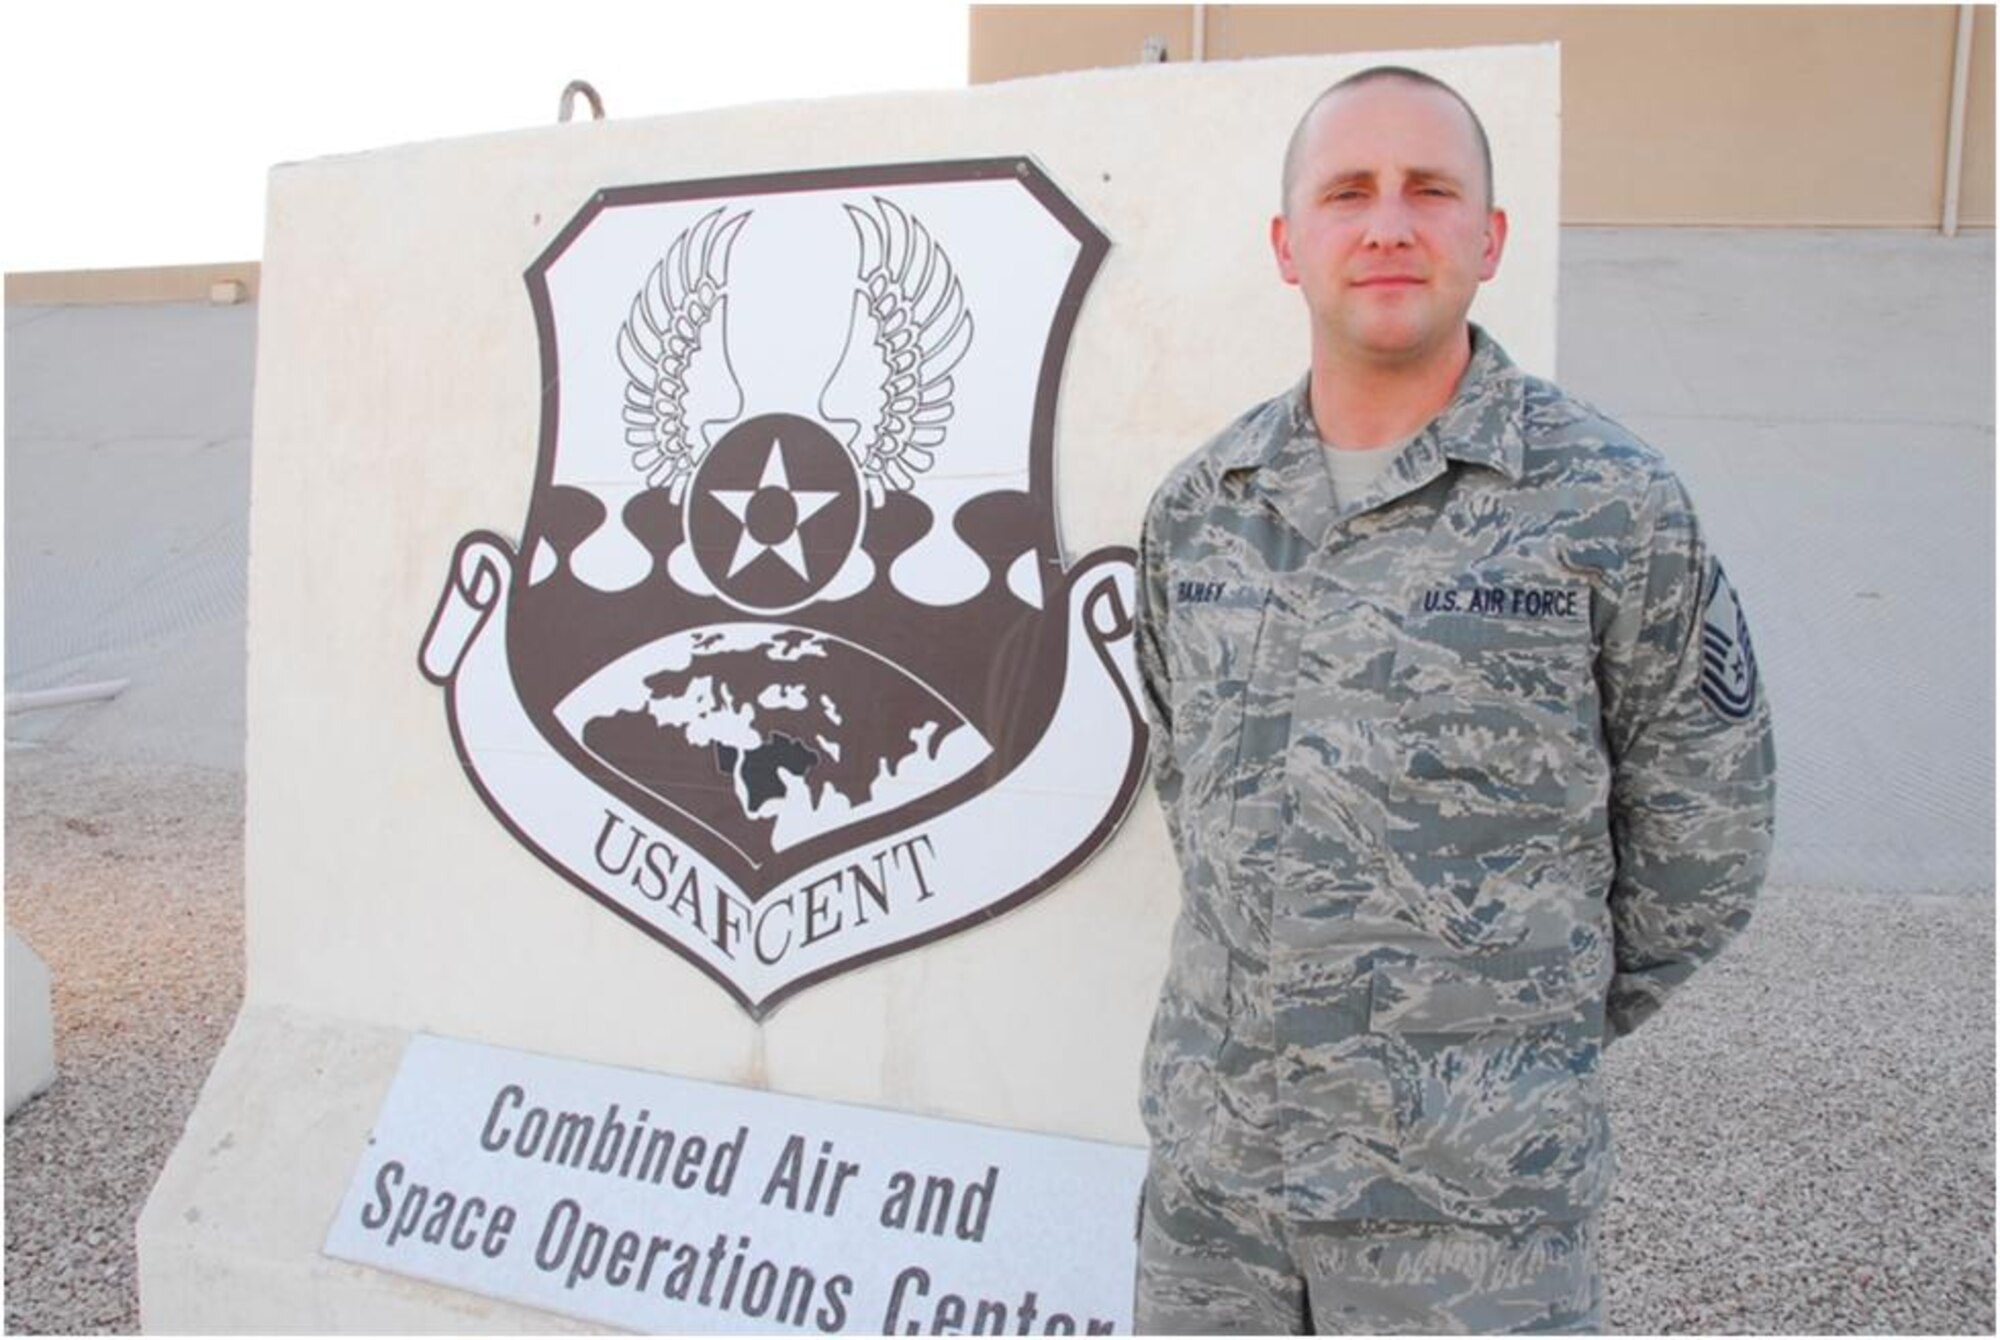 Master Sgt. Robert E. Bailey poses for a picture during a seven-month deployment in 2011 and 2012 to the Combined Air and Space Operations Center in Southwest Asia where he served as the Superintendent of the Targeting and Imagery Support Element. While deployed, Bailey was recognized for his excellence and selected to be the SNCO of the Year for the state of Connecticut. (Photo courtesy of Master Sgt. Robert Bailey) 